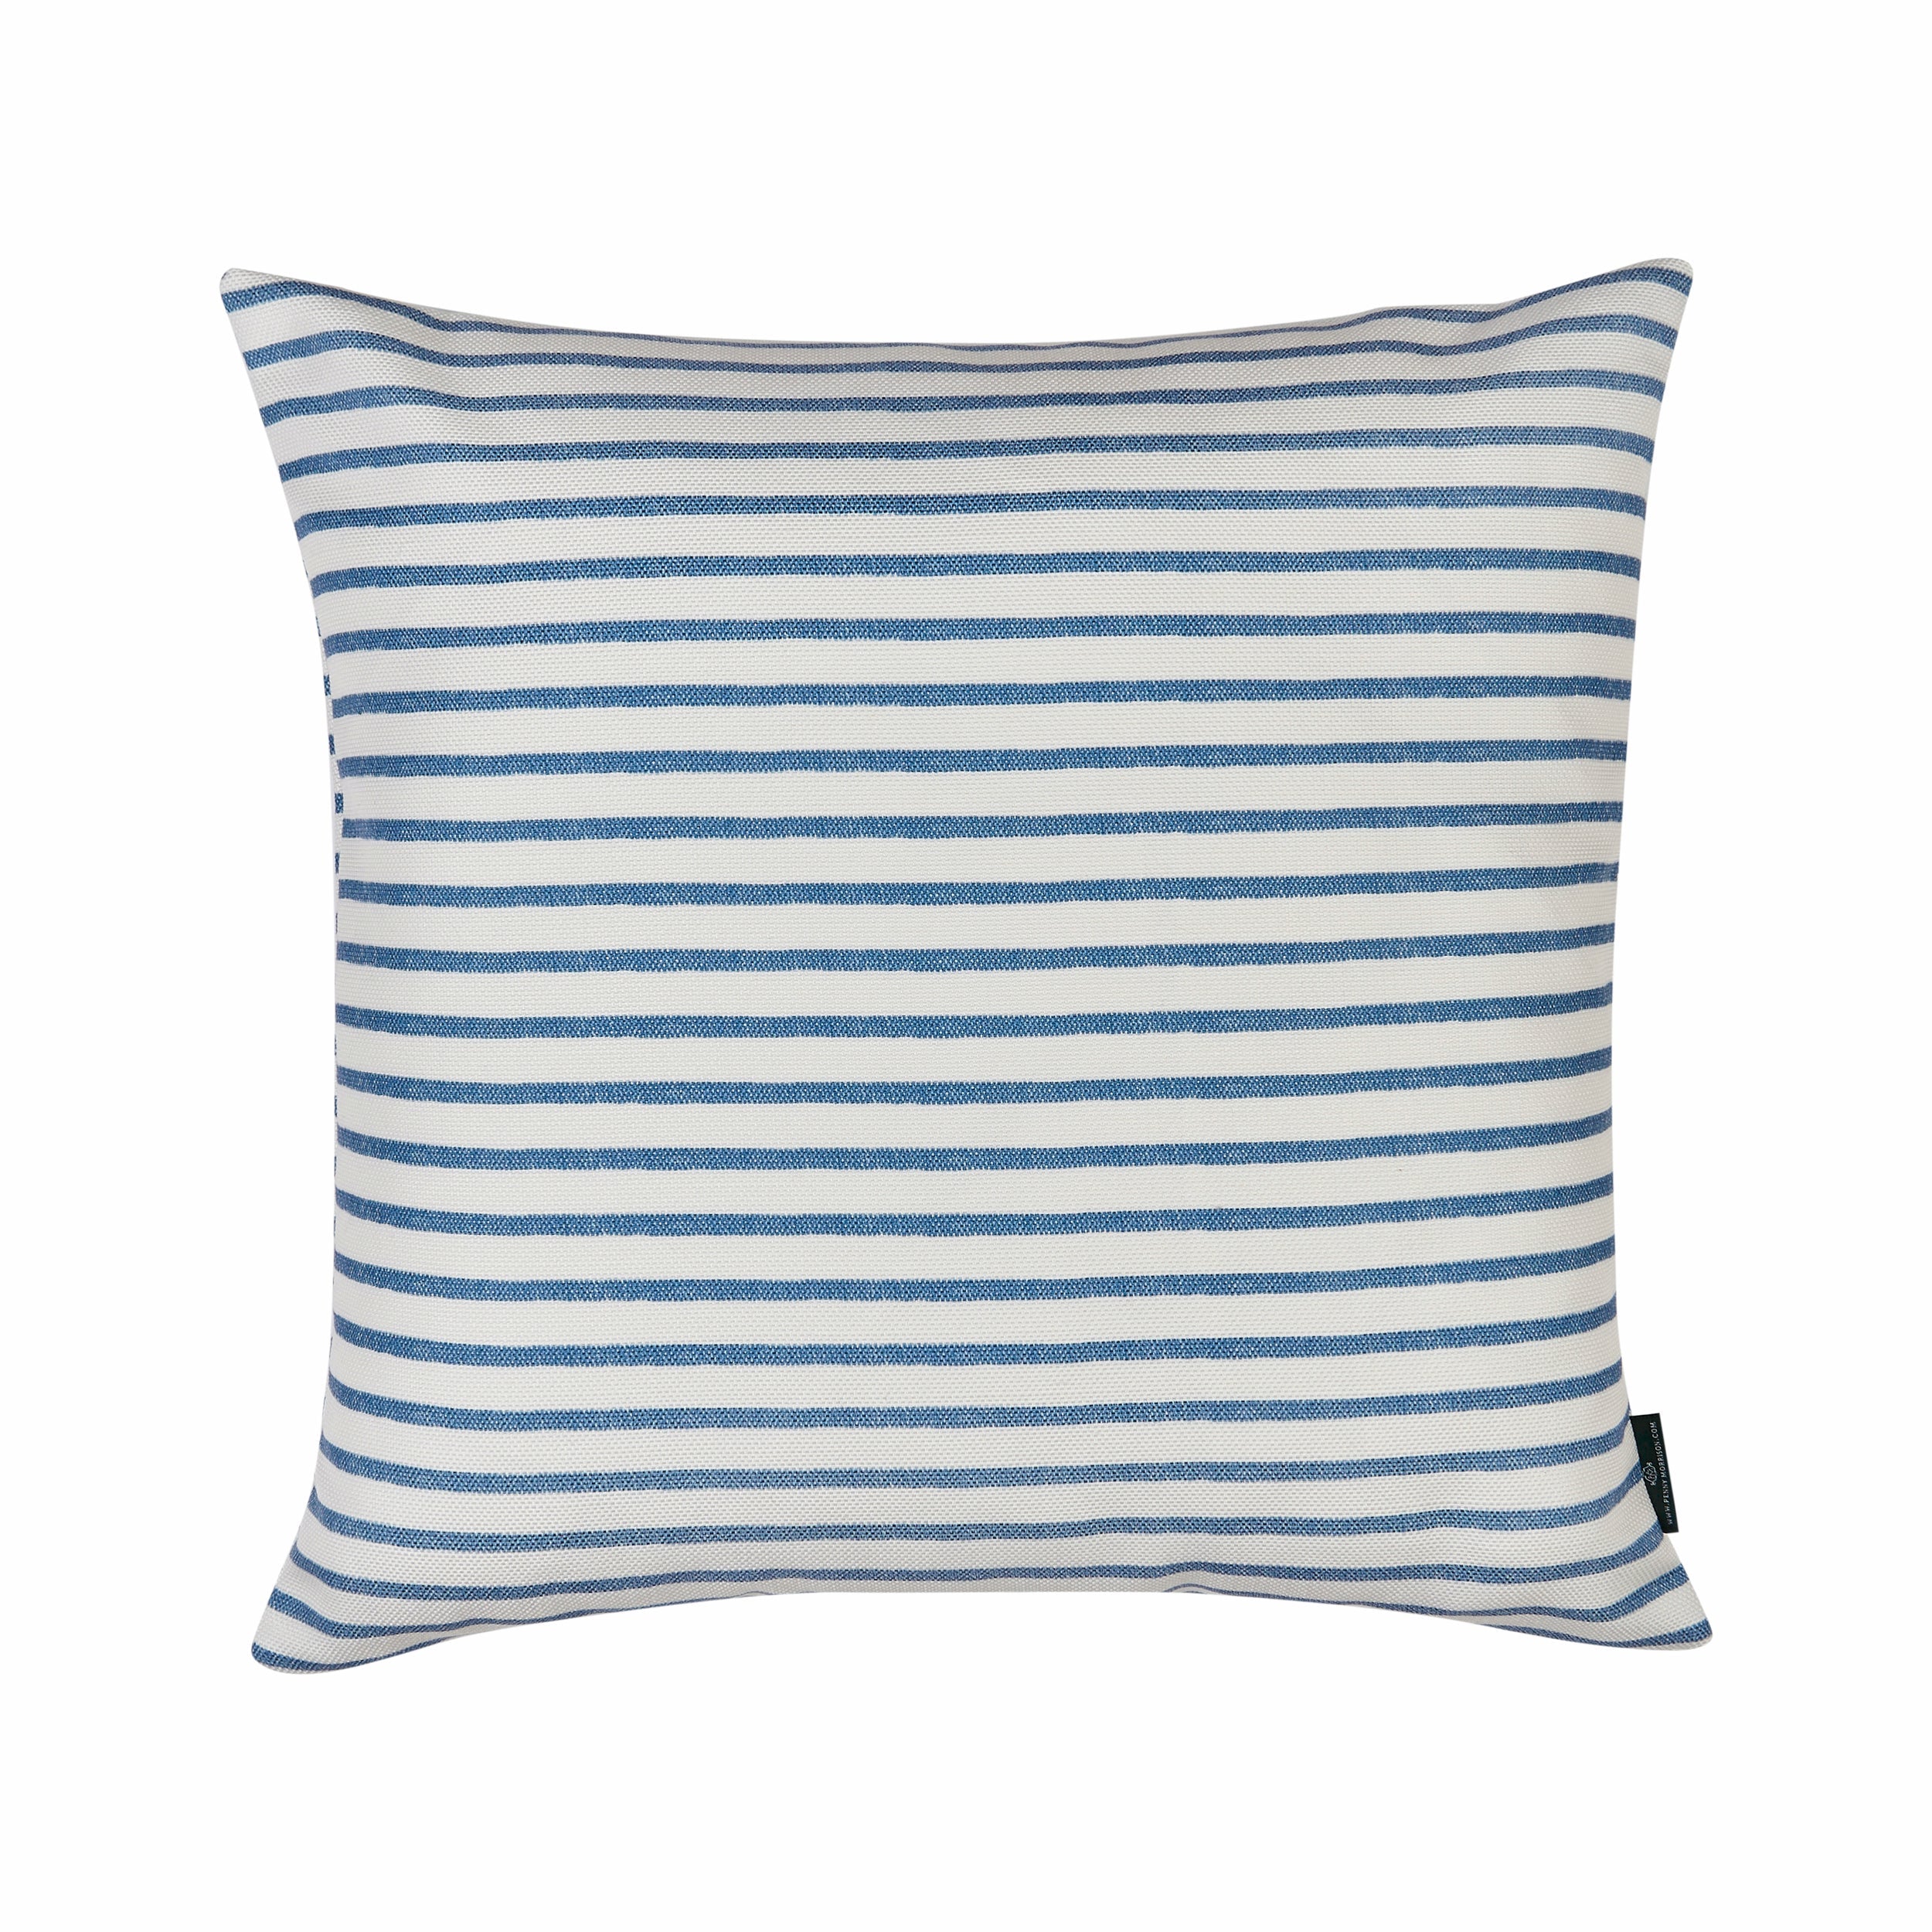 Harriet Stripe Performance/Outdoor Blue Square Cushion